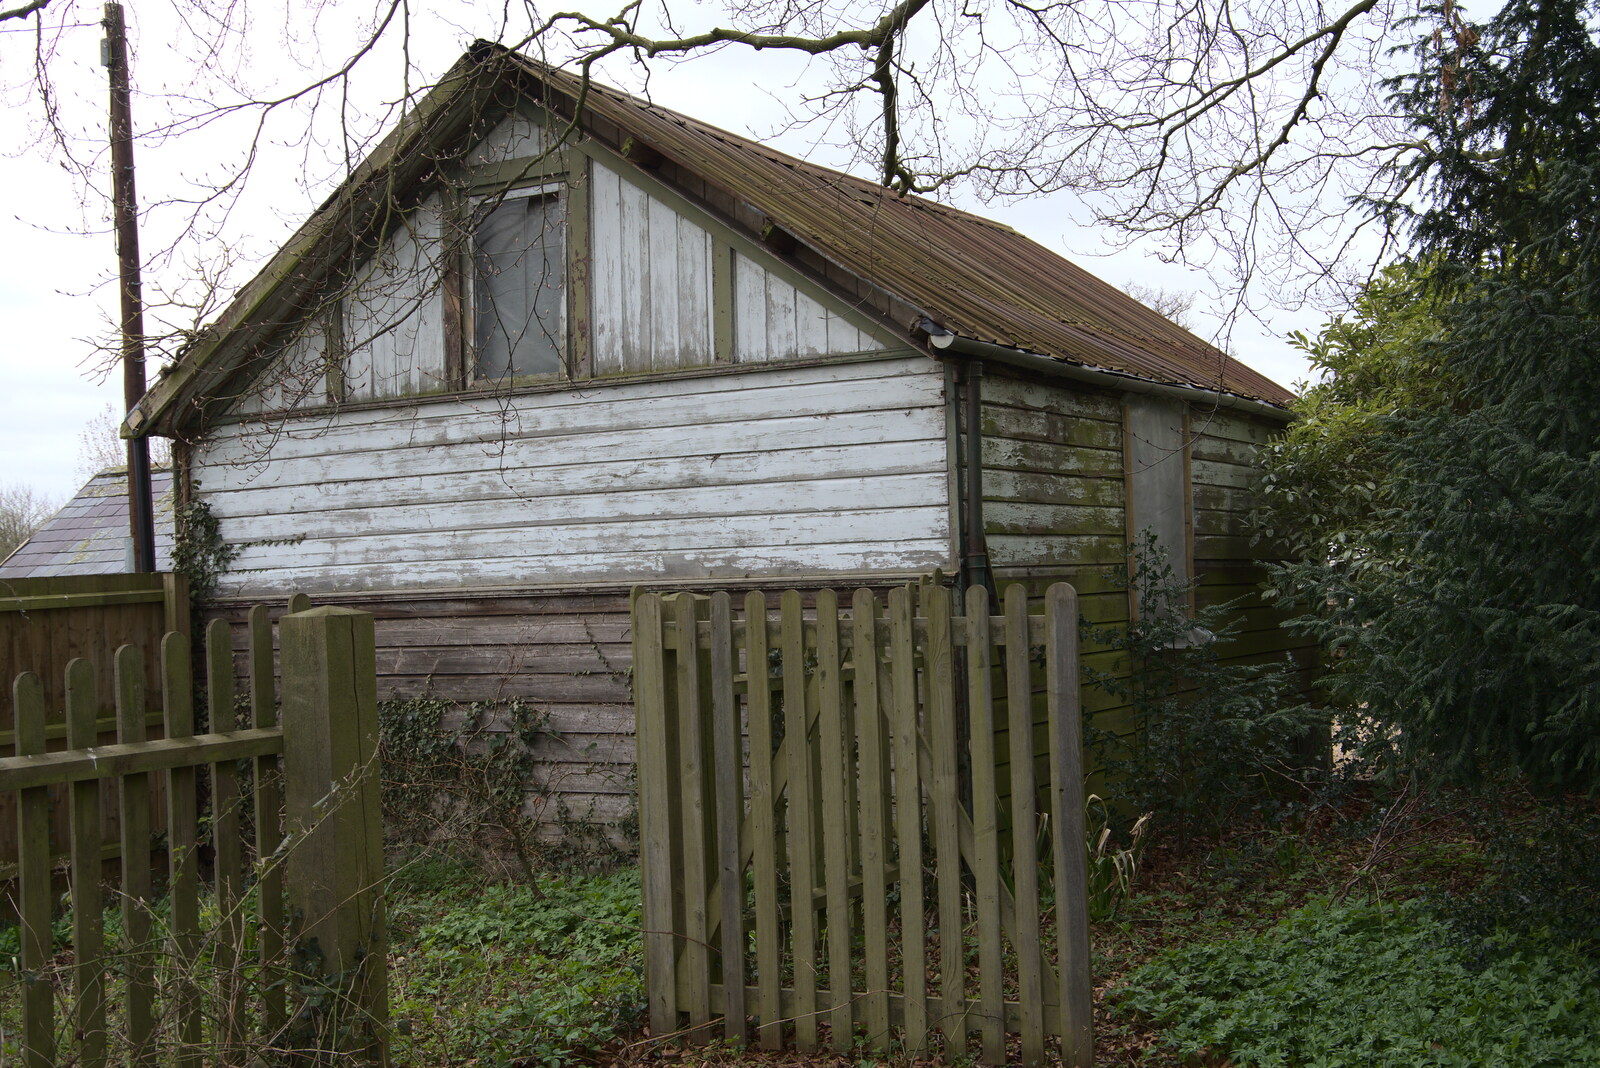 A derelict shed from A Return to Bressingham Steam and Gardens, Bressingham, Norfolk - 28th March 2021